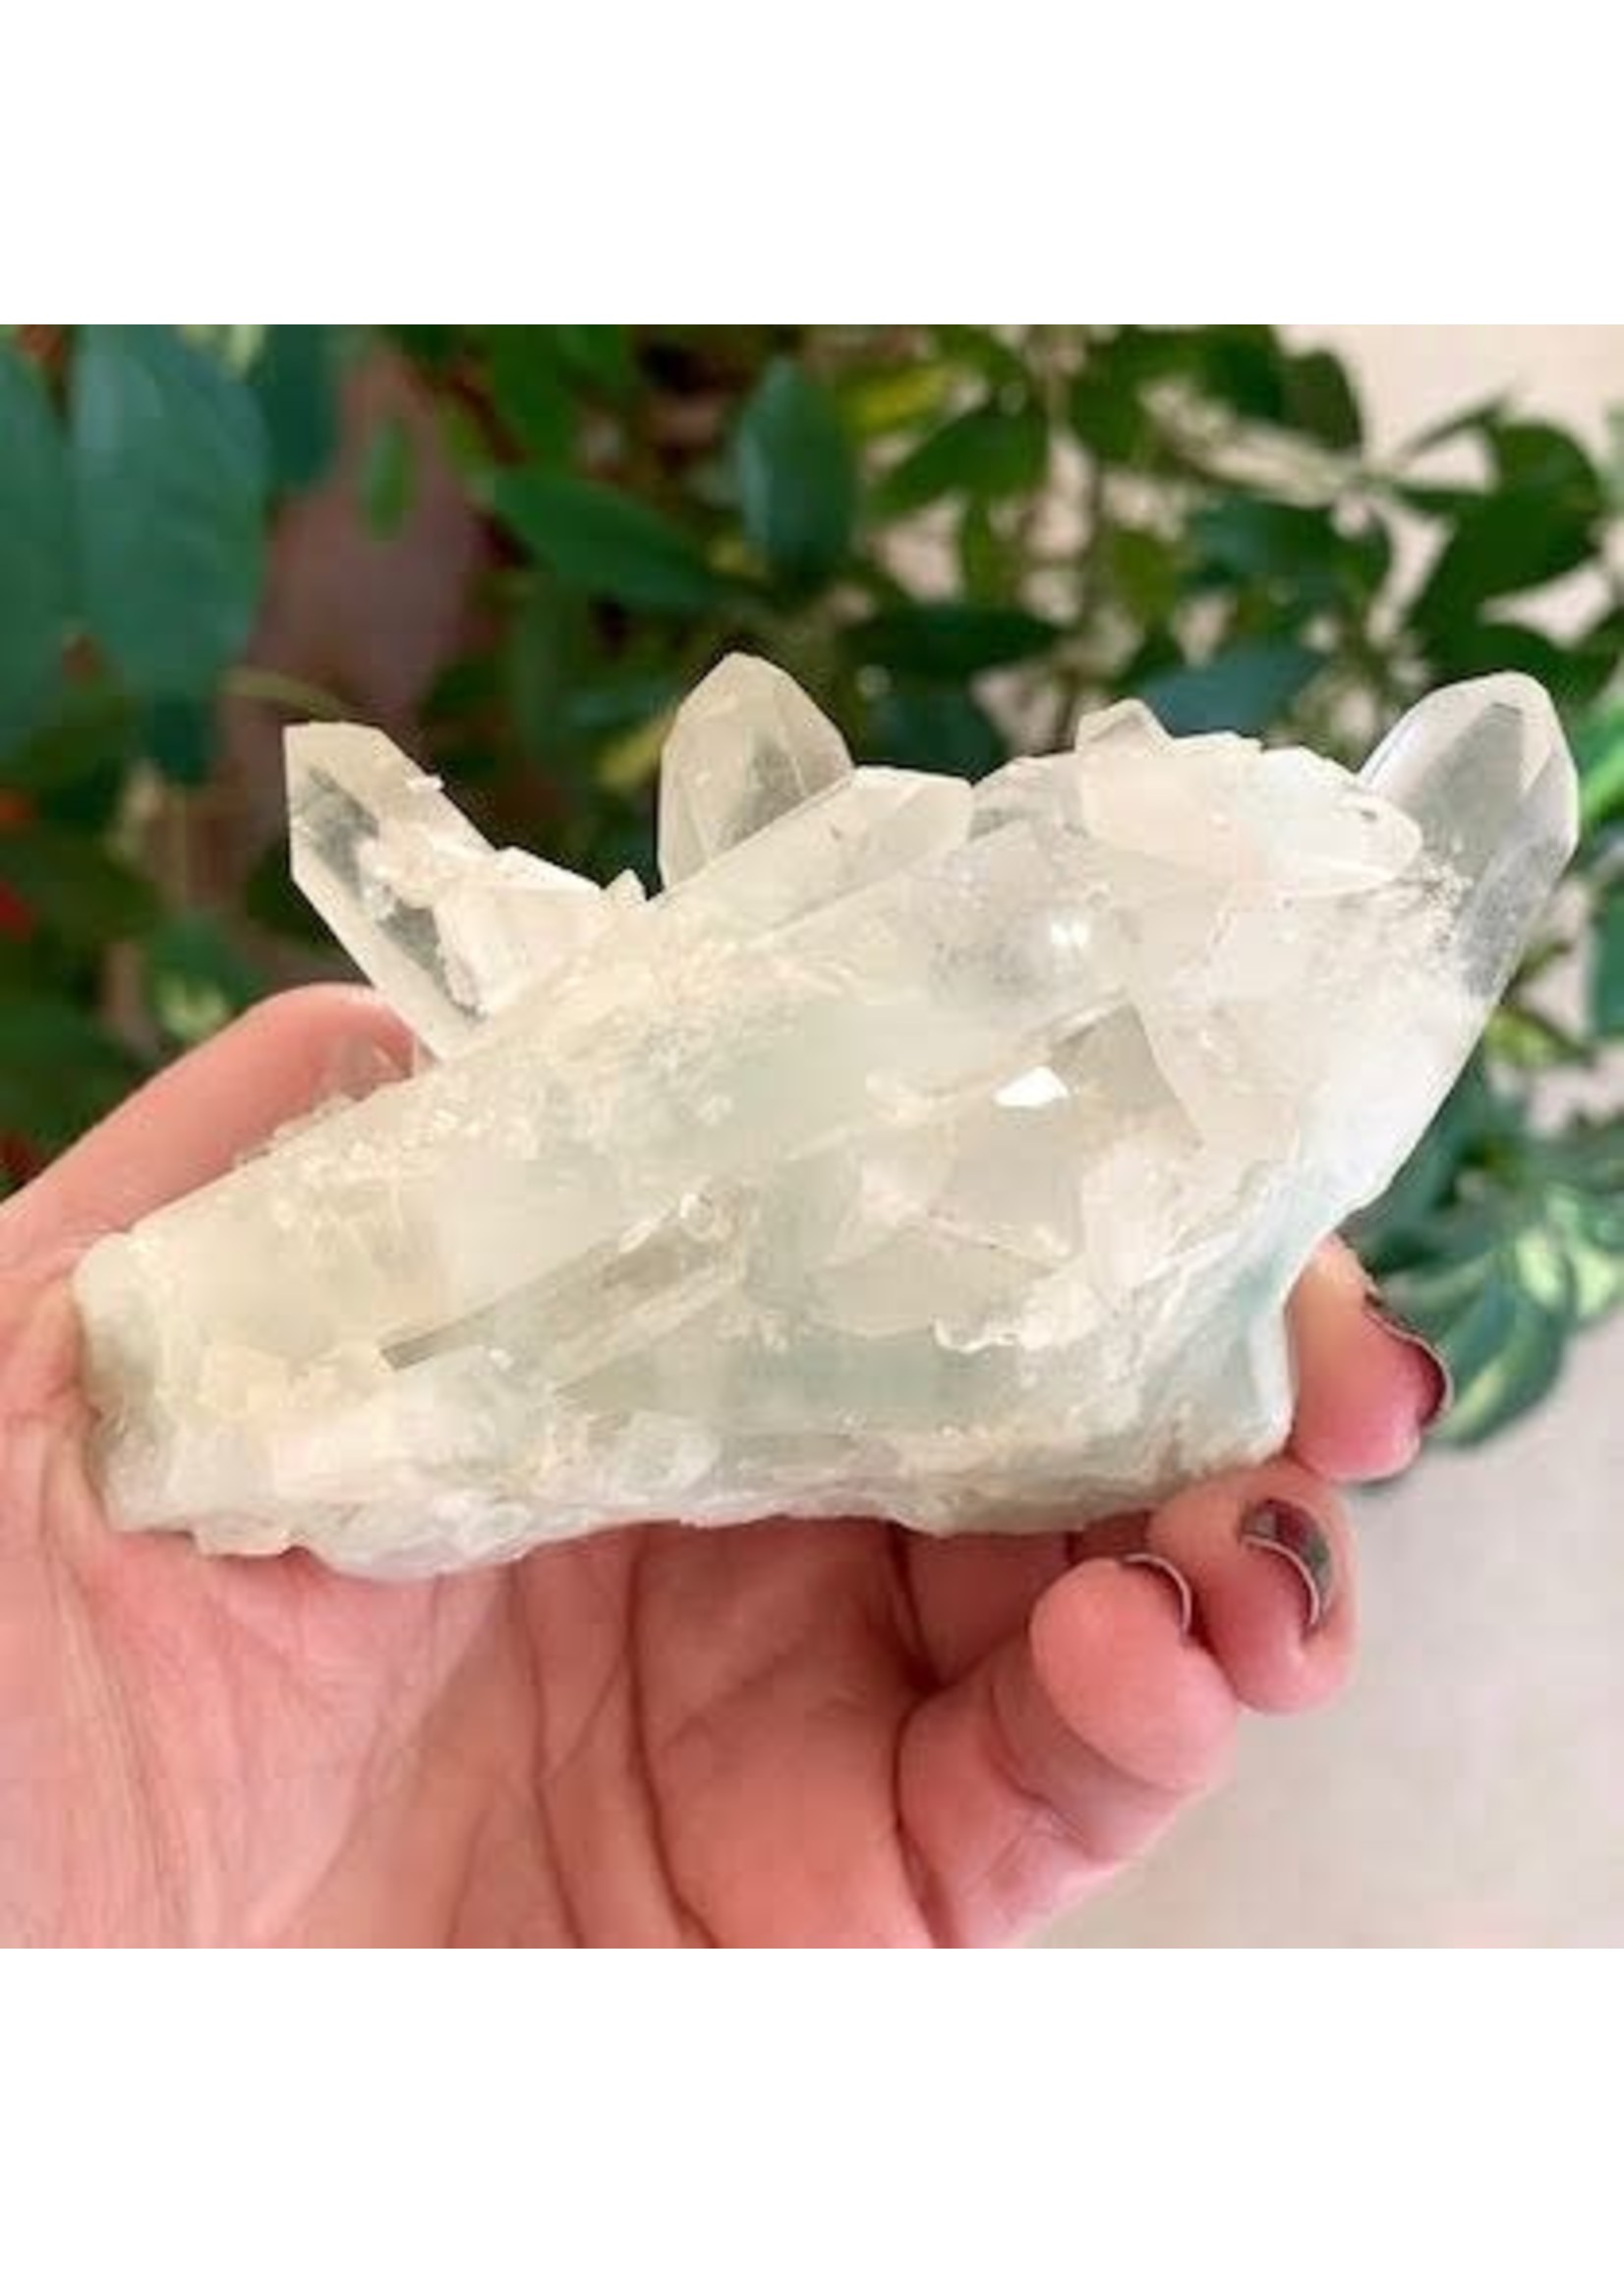 Quartz with Fuchsite Phantoms Clusters for rejoicing in who you are